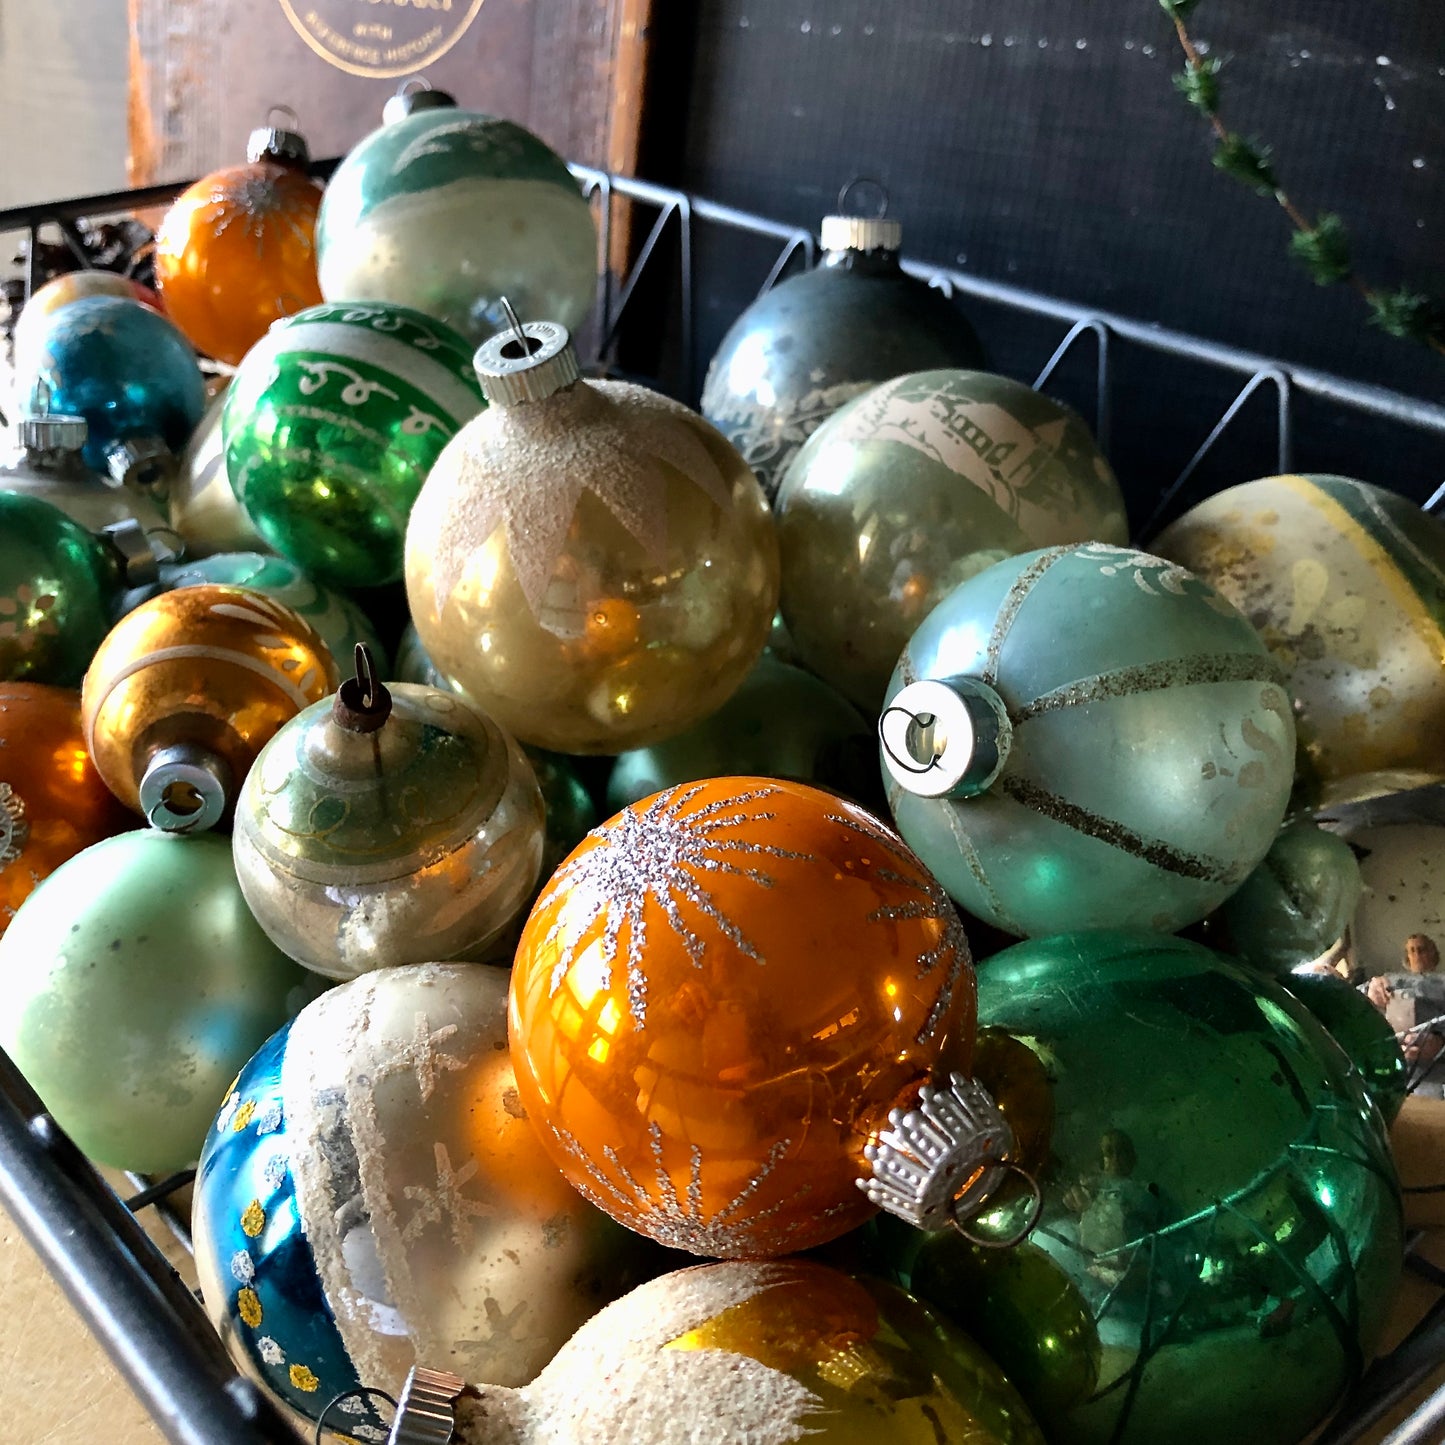 Large Group of Sea Glass Vintage Christmas Ornaments (c.1950s)